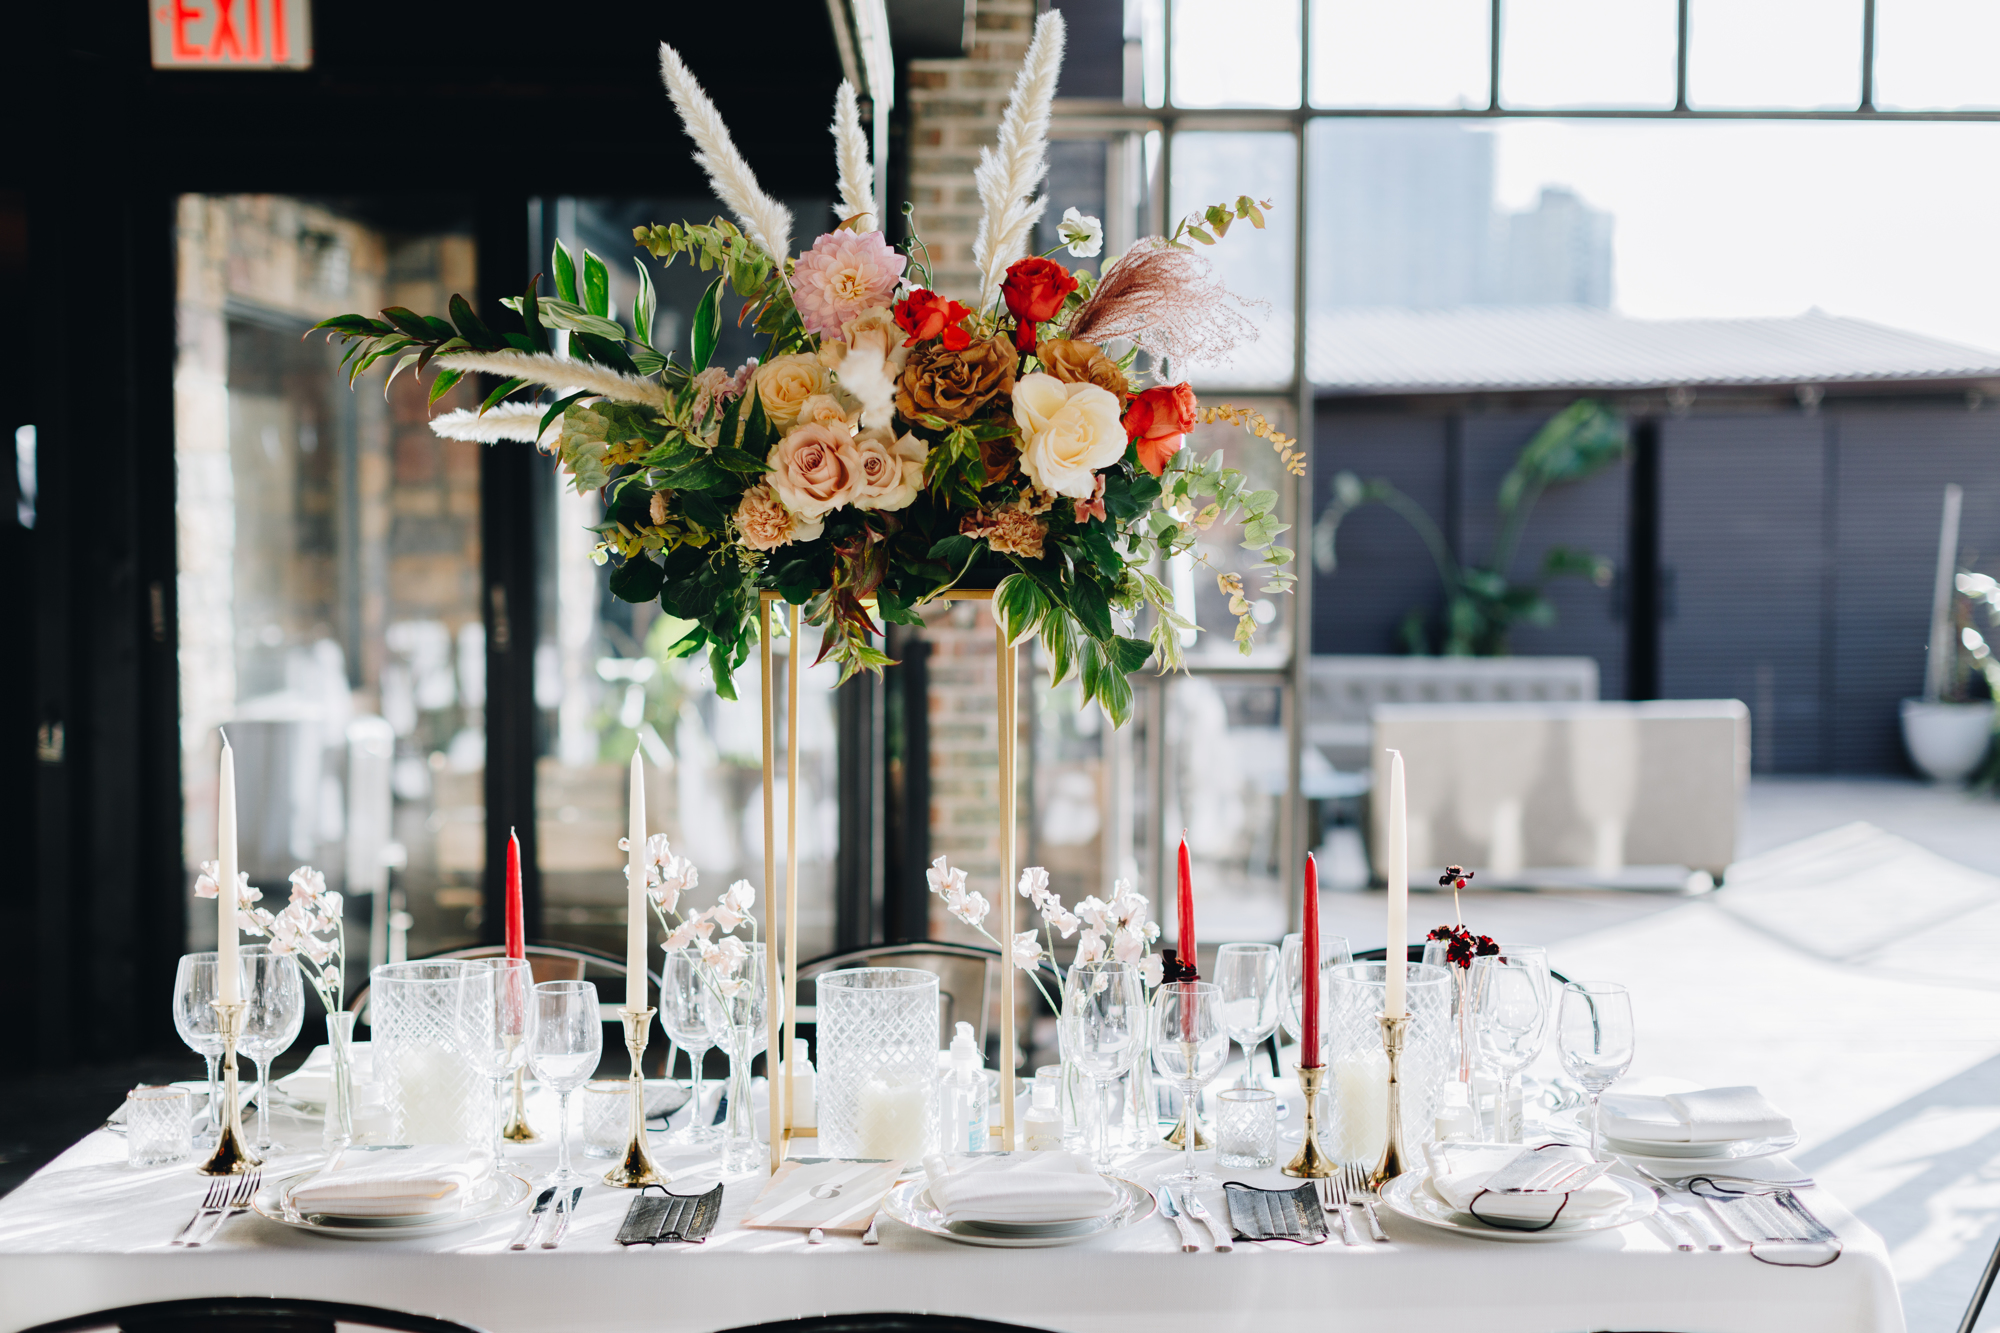 Ravel Hotel wedding reception with gorgeous decor and design